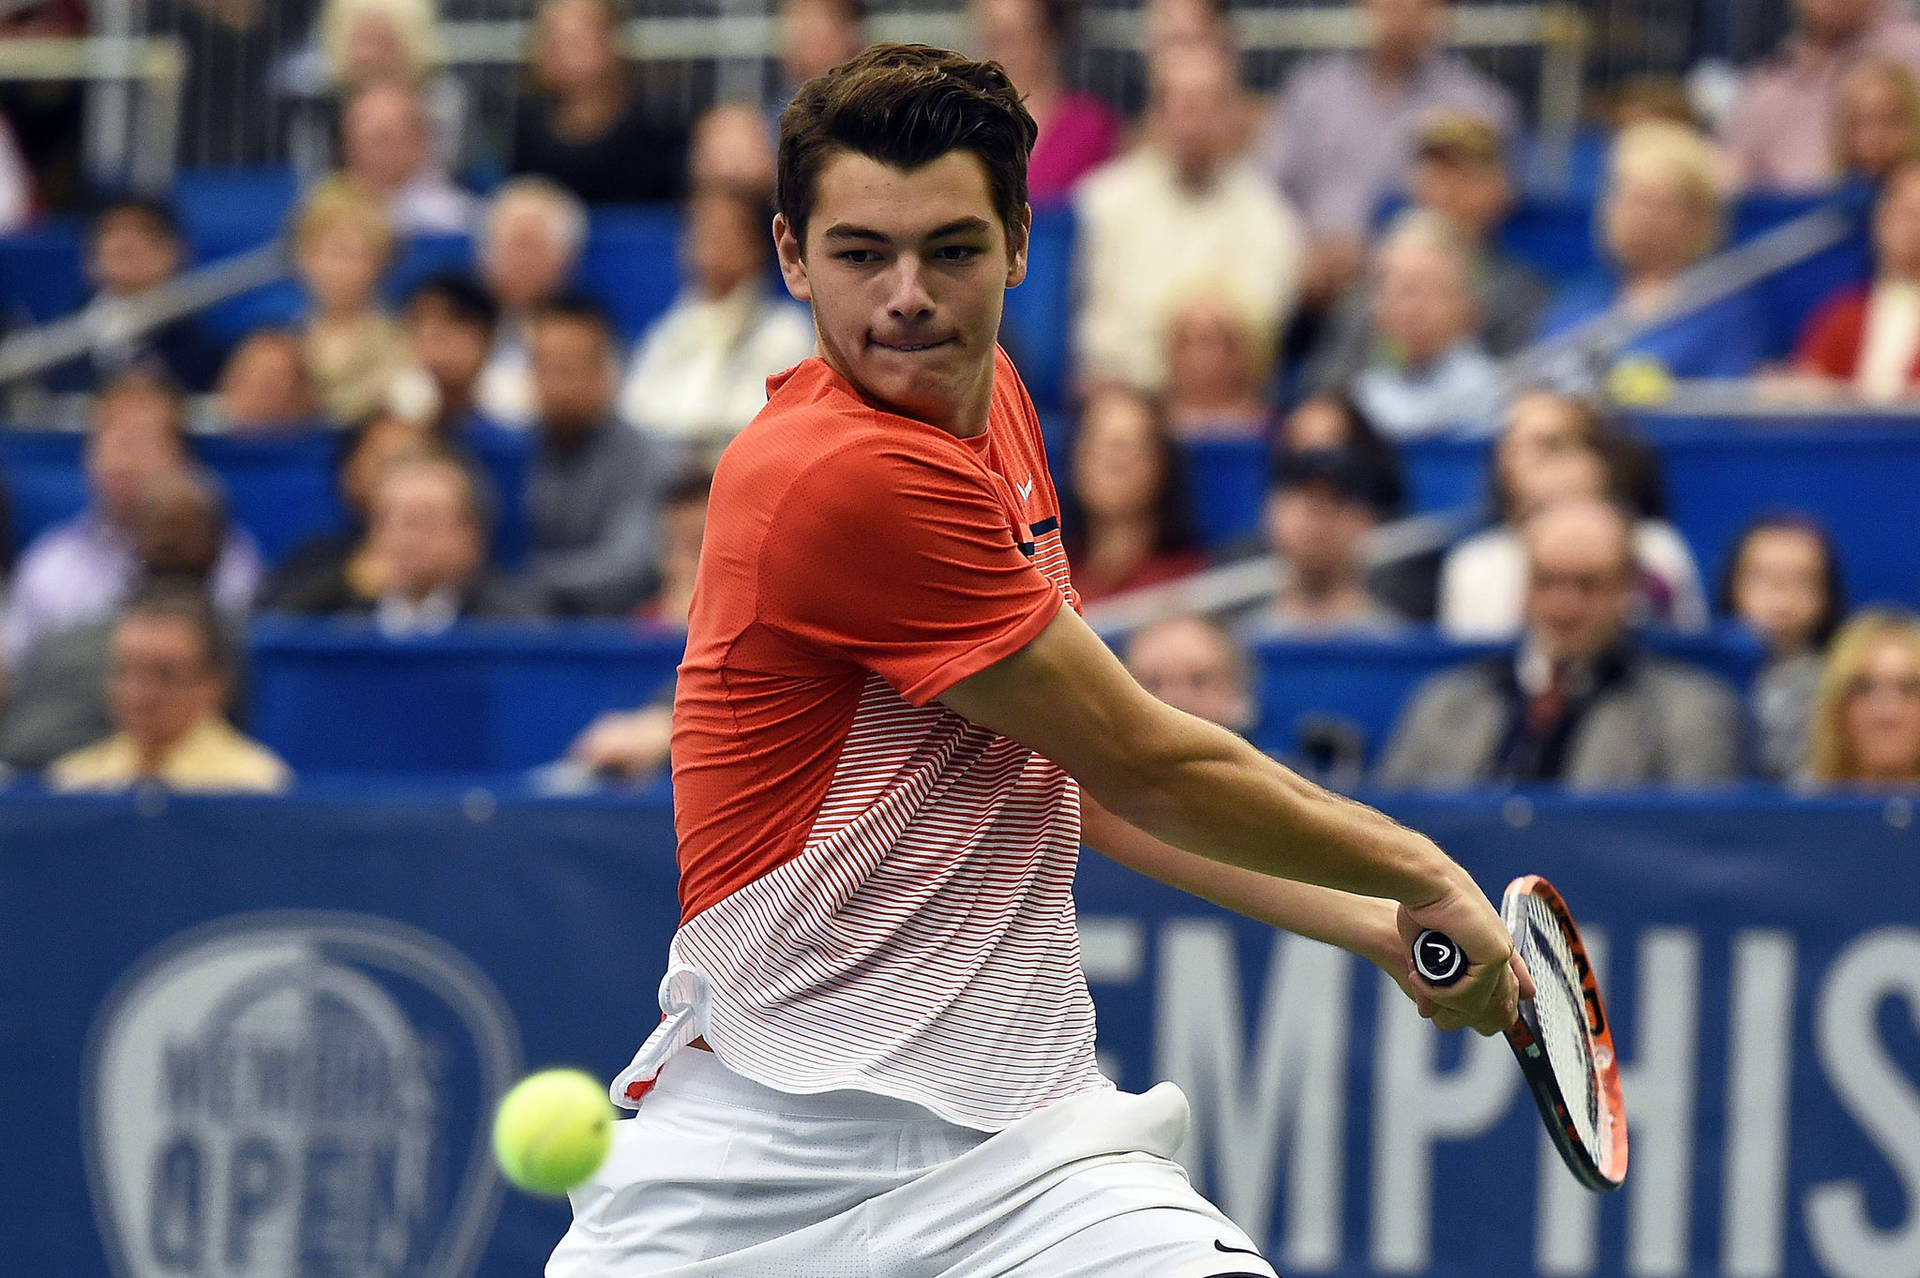 Young Tennis Player Taylor Fritz